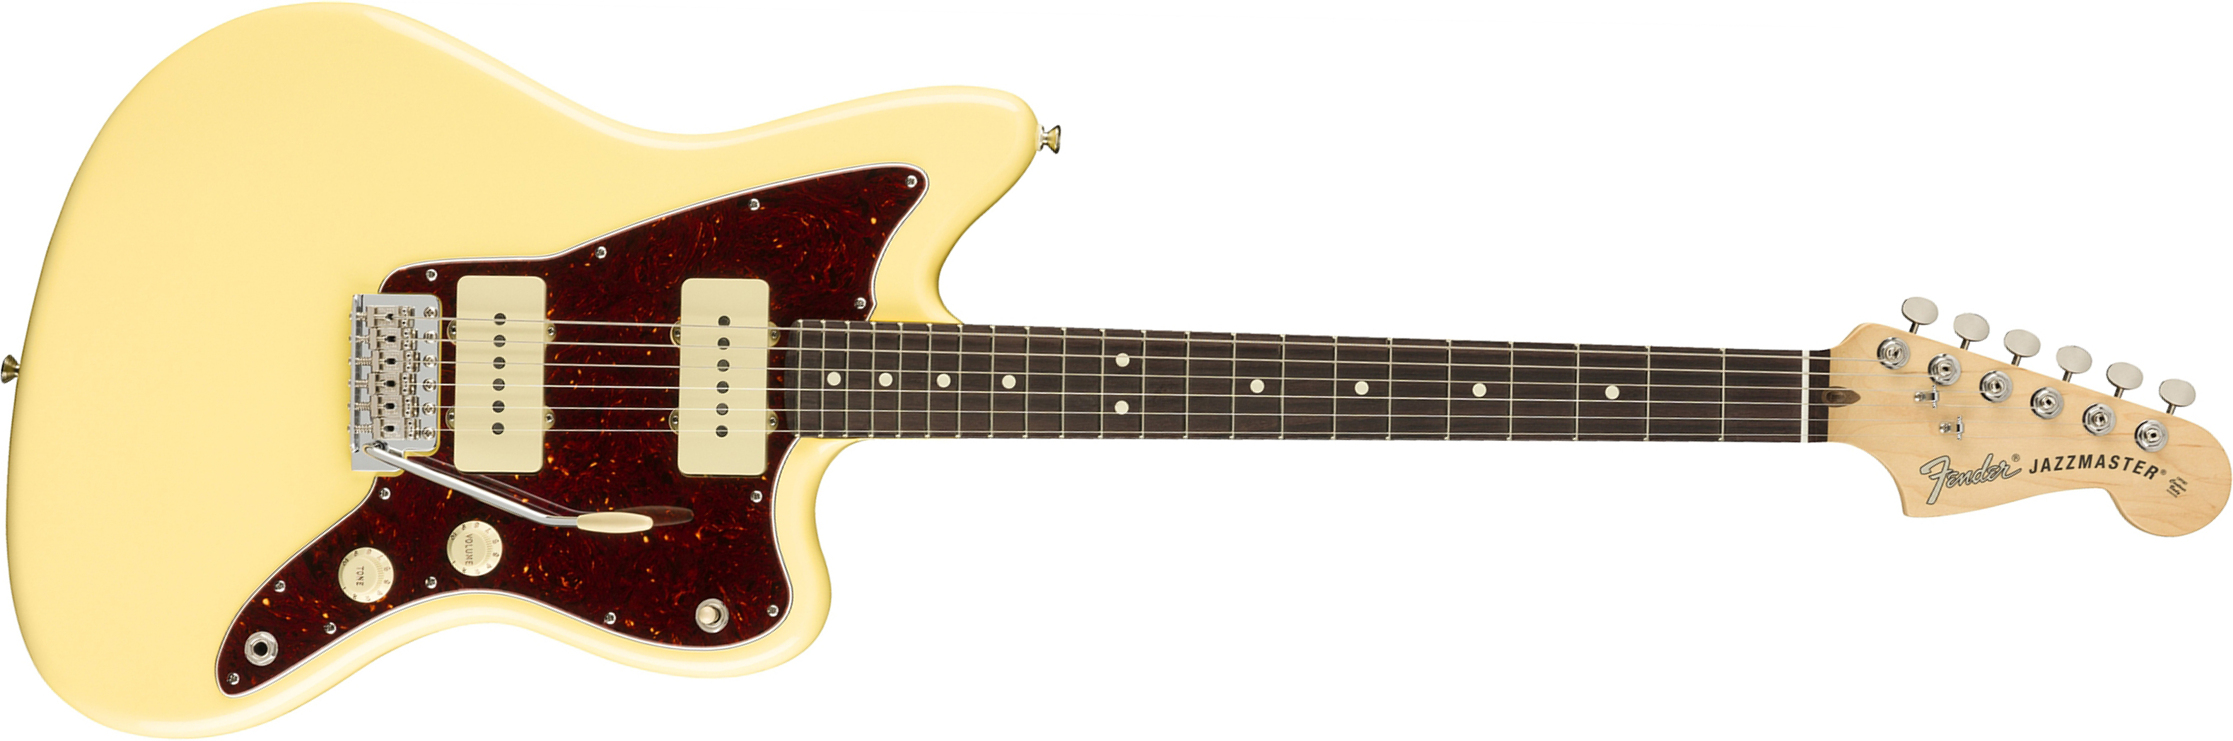 Fender Jazzmaster American Performer Usa Ss Rw - Vintage White - Double cut electric guitar - Main picture